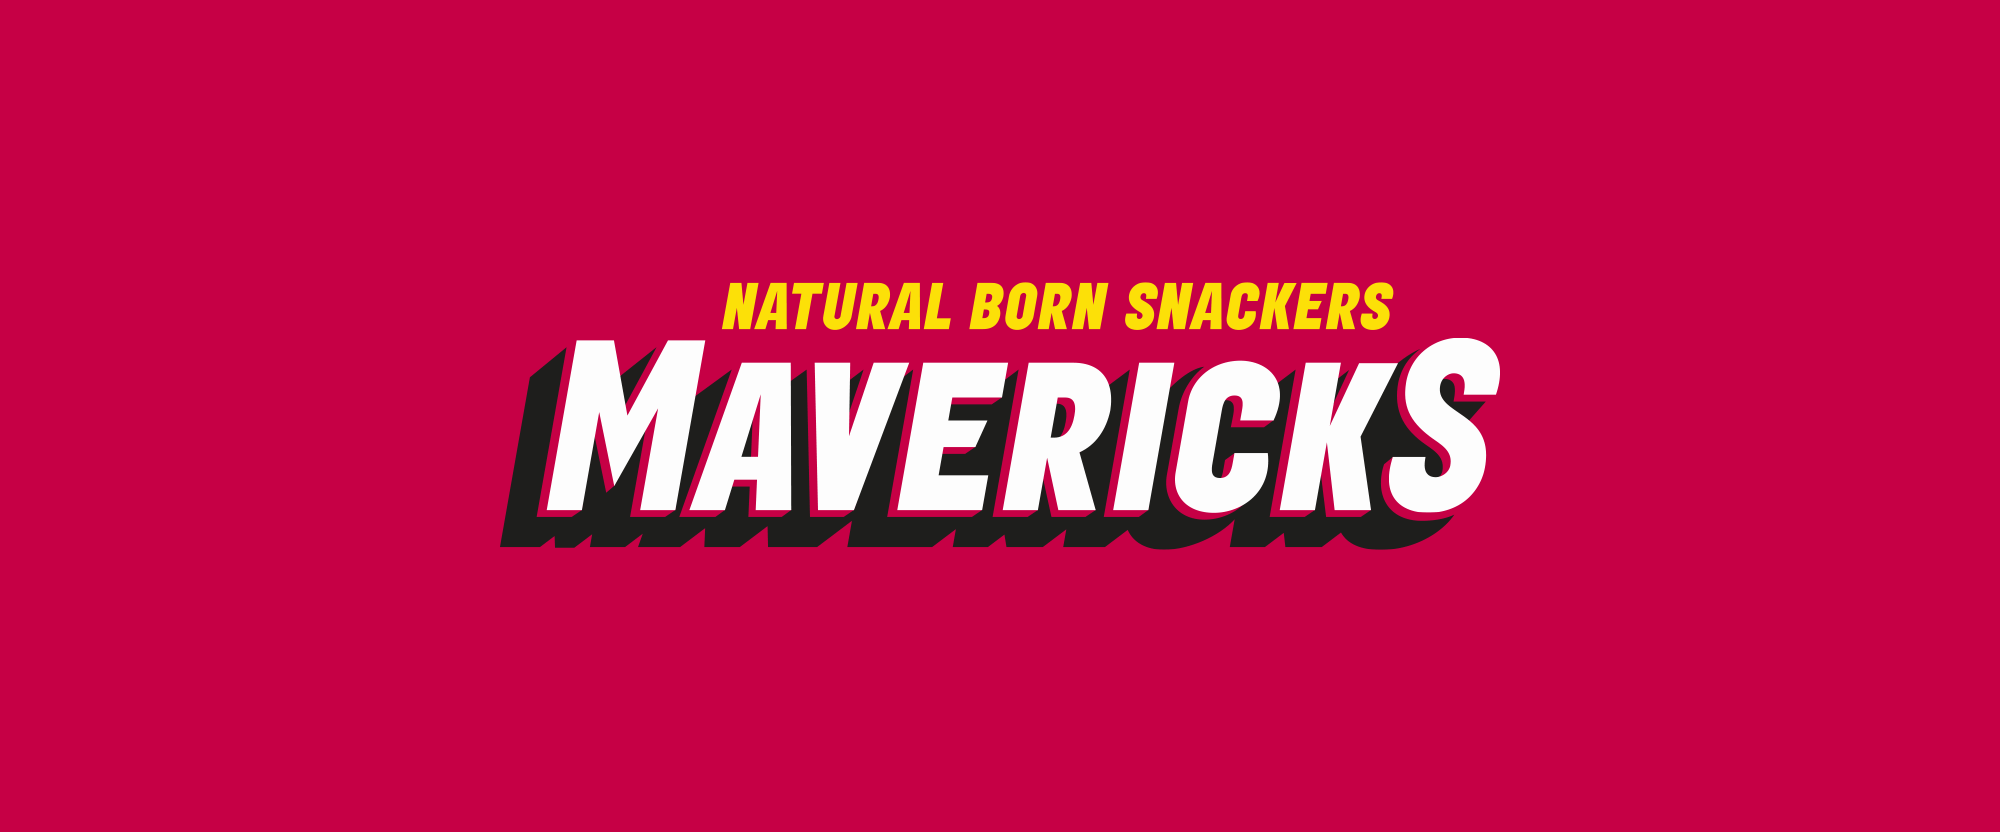 New Logo and Packaging for Mavericks Snacks by Jones Knowles Ritchie